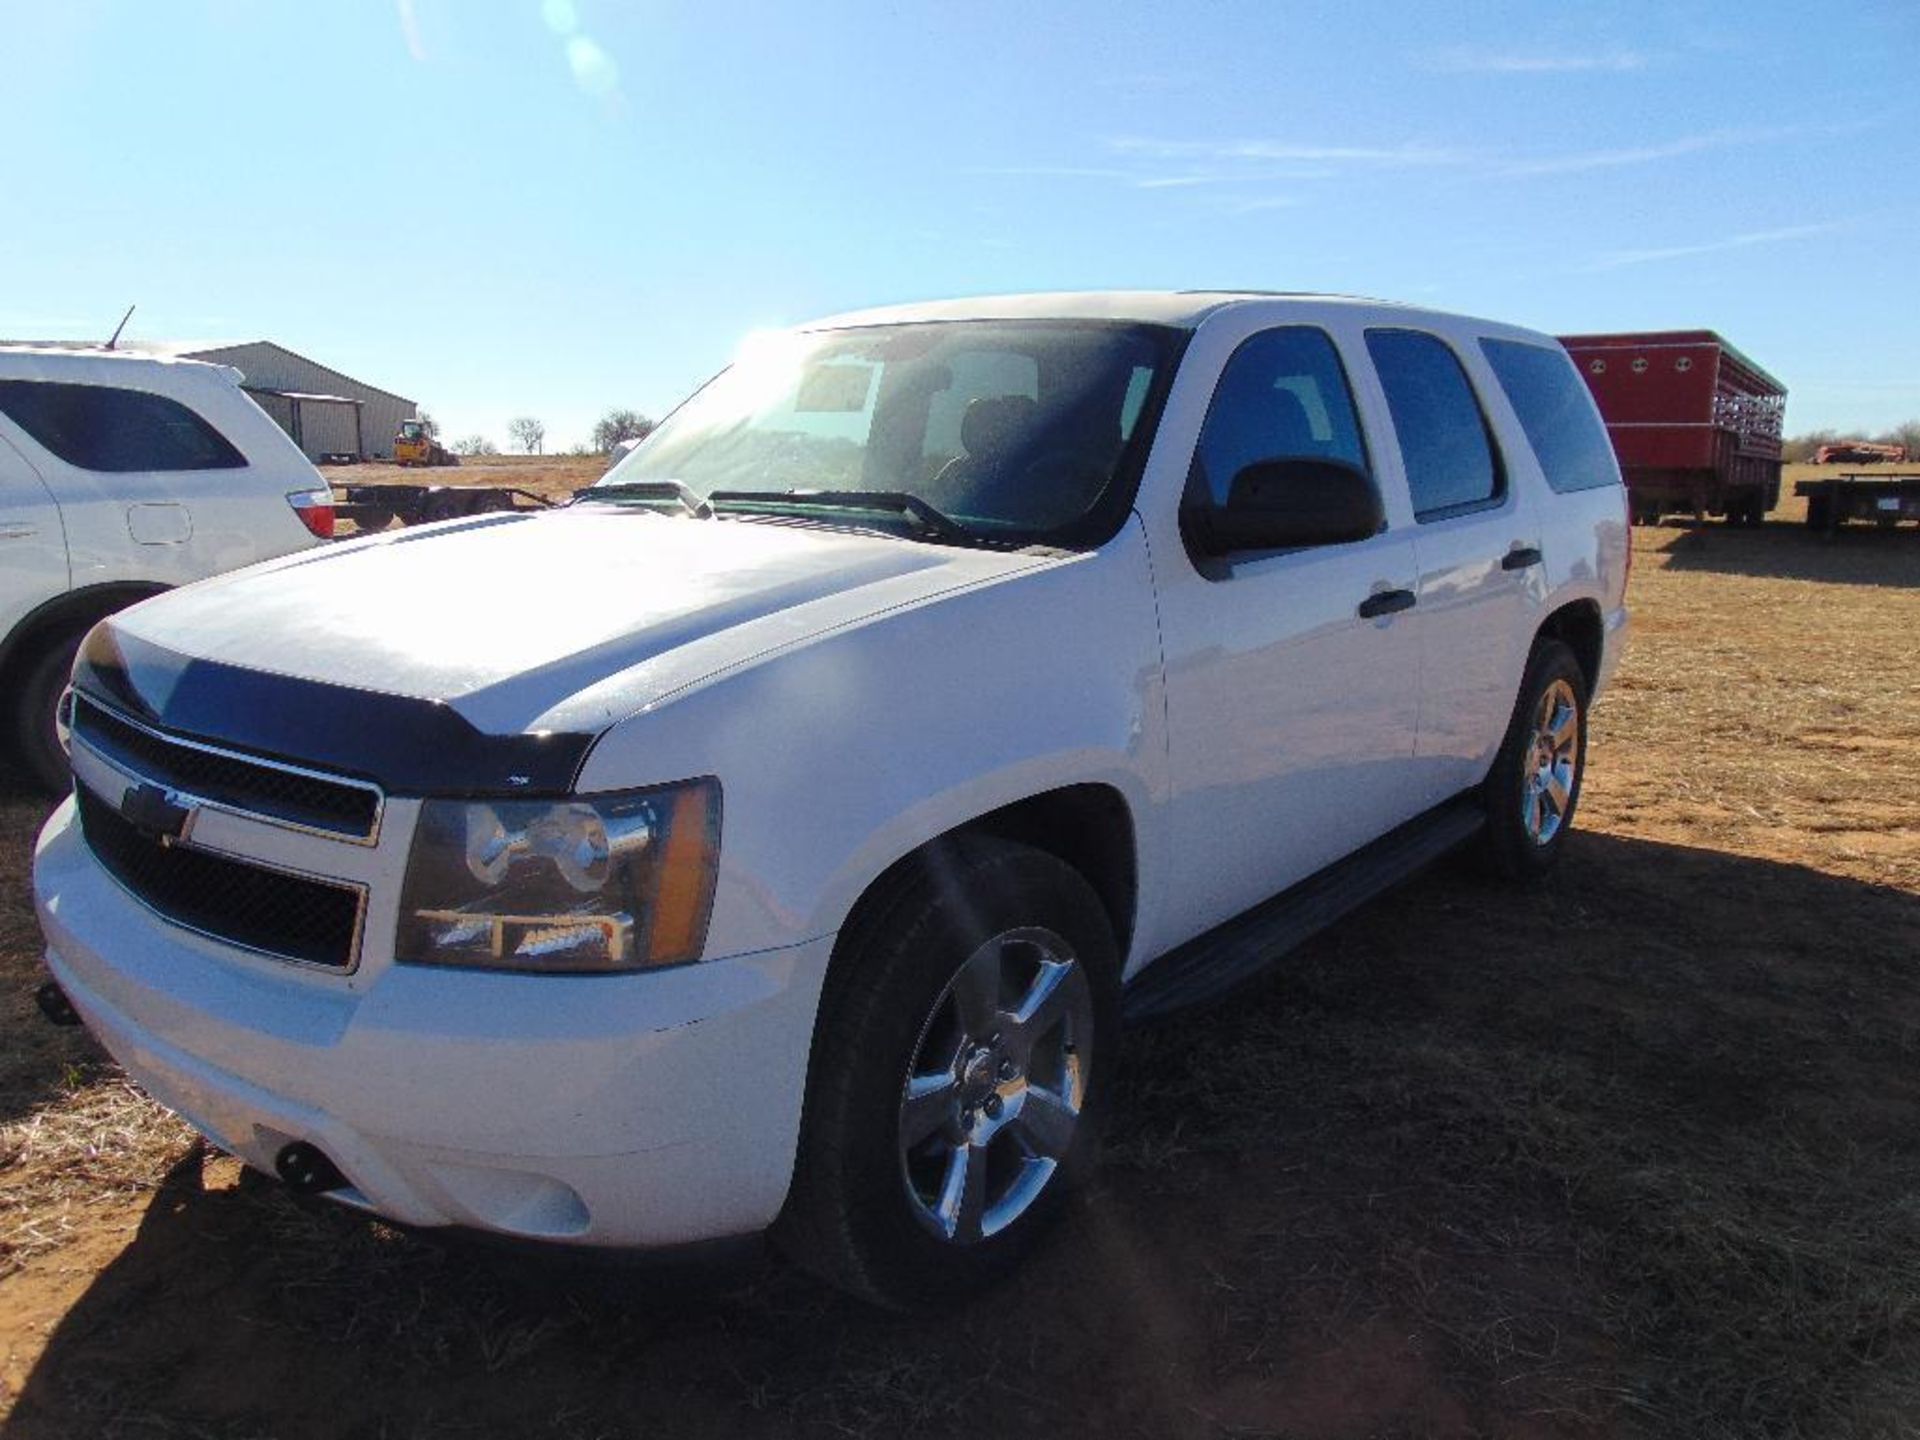 2011 Chevy Tahoe SUV, s/n 1gncc2e08br316115, v8 gas eng, auto trans, od reads 131994 miles, - Image 4 of 10